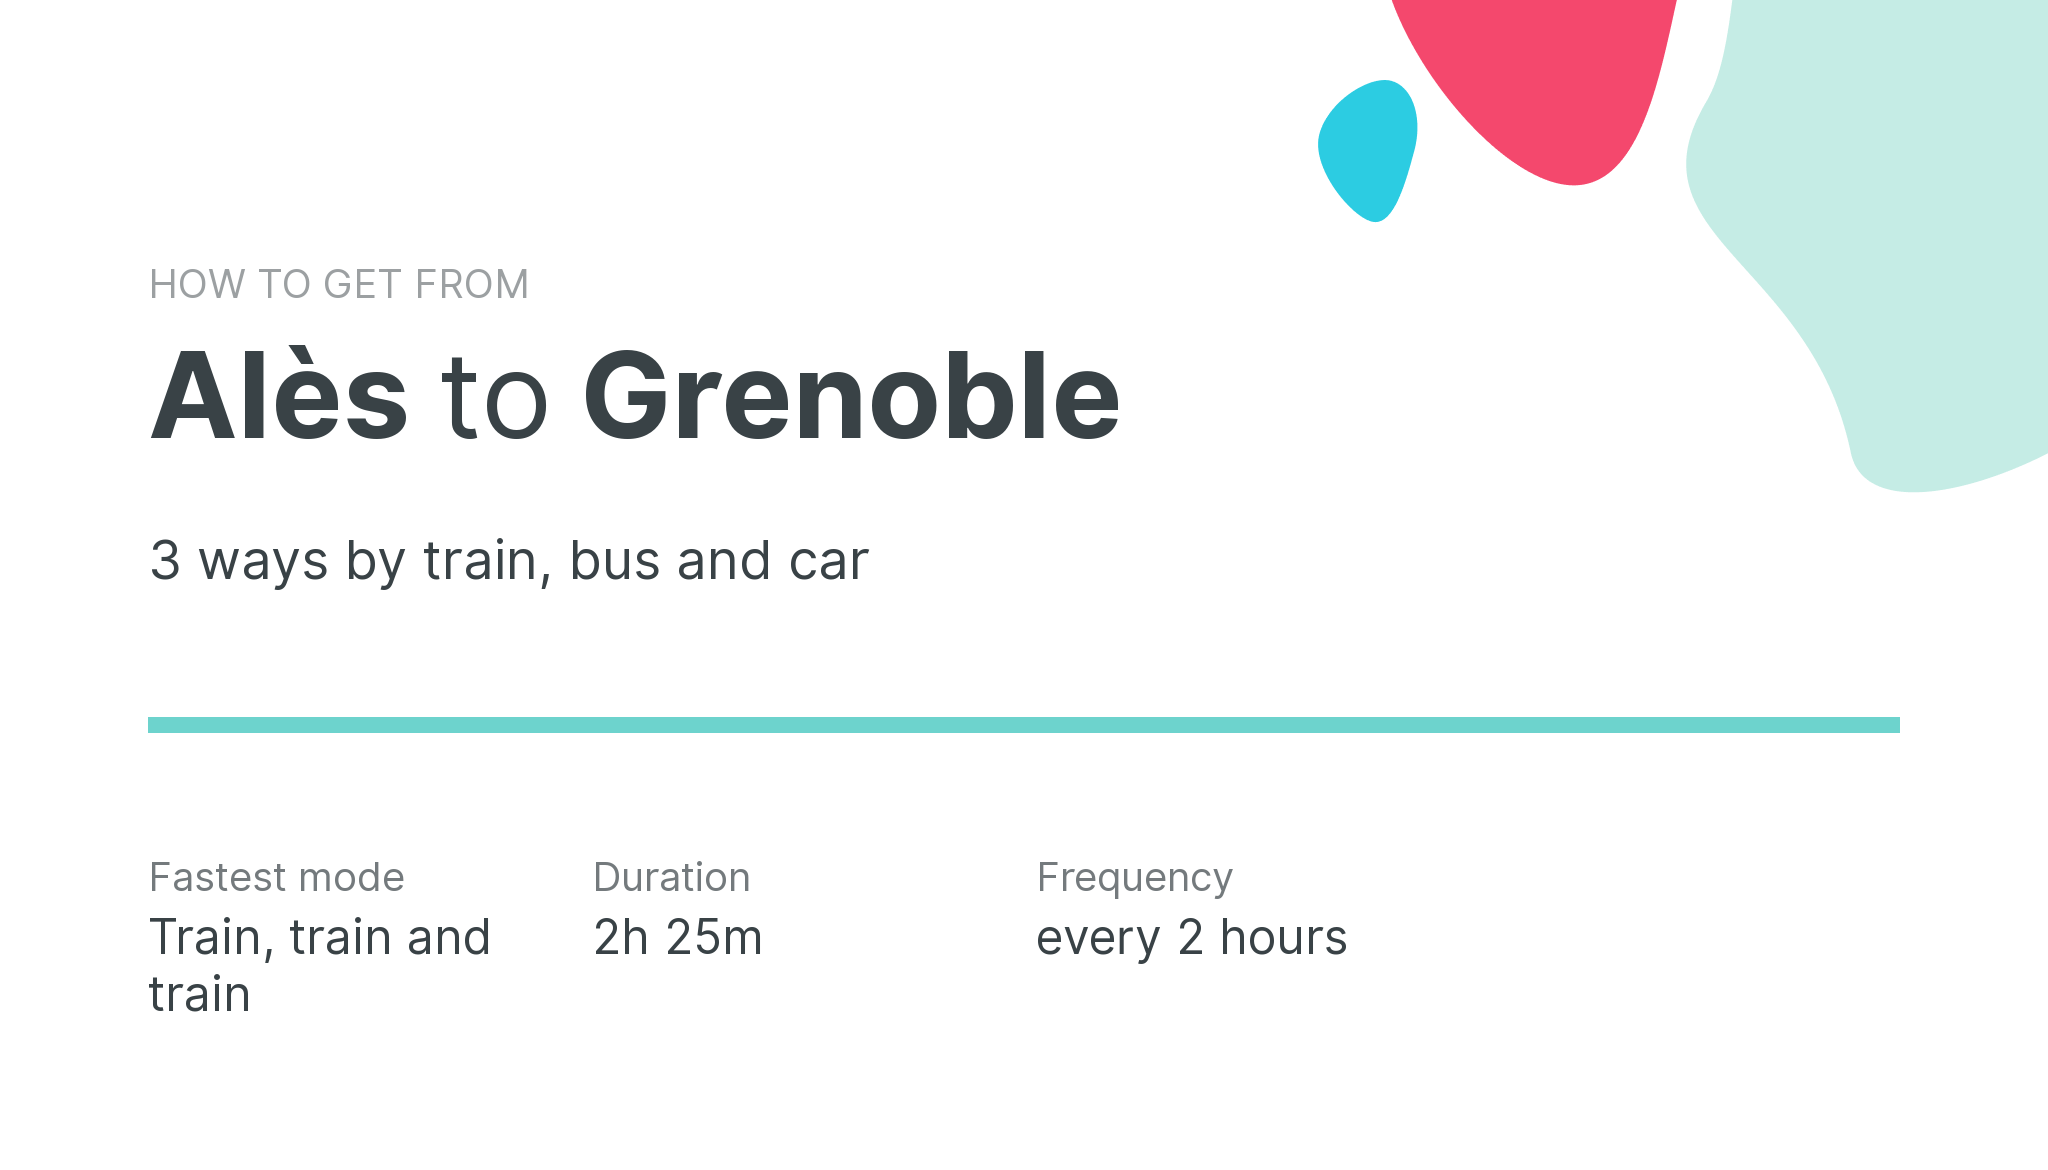 How do I get from Alès to Grenoble